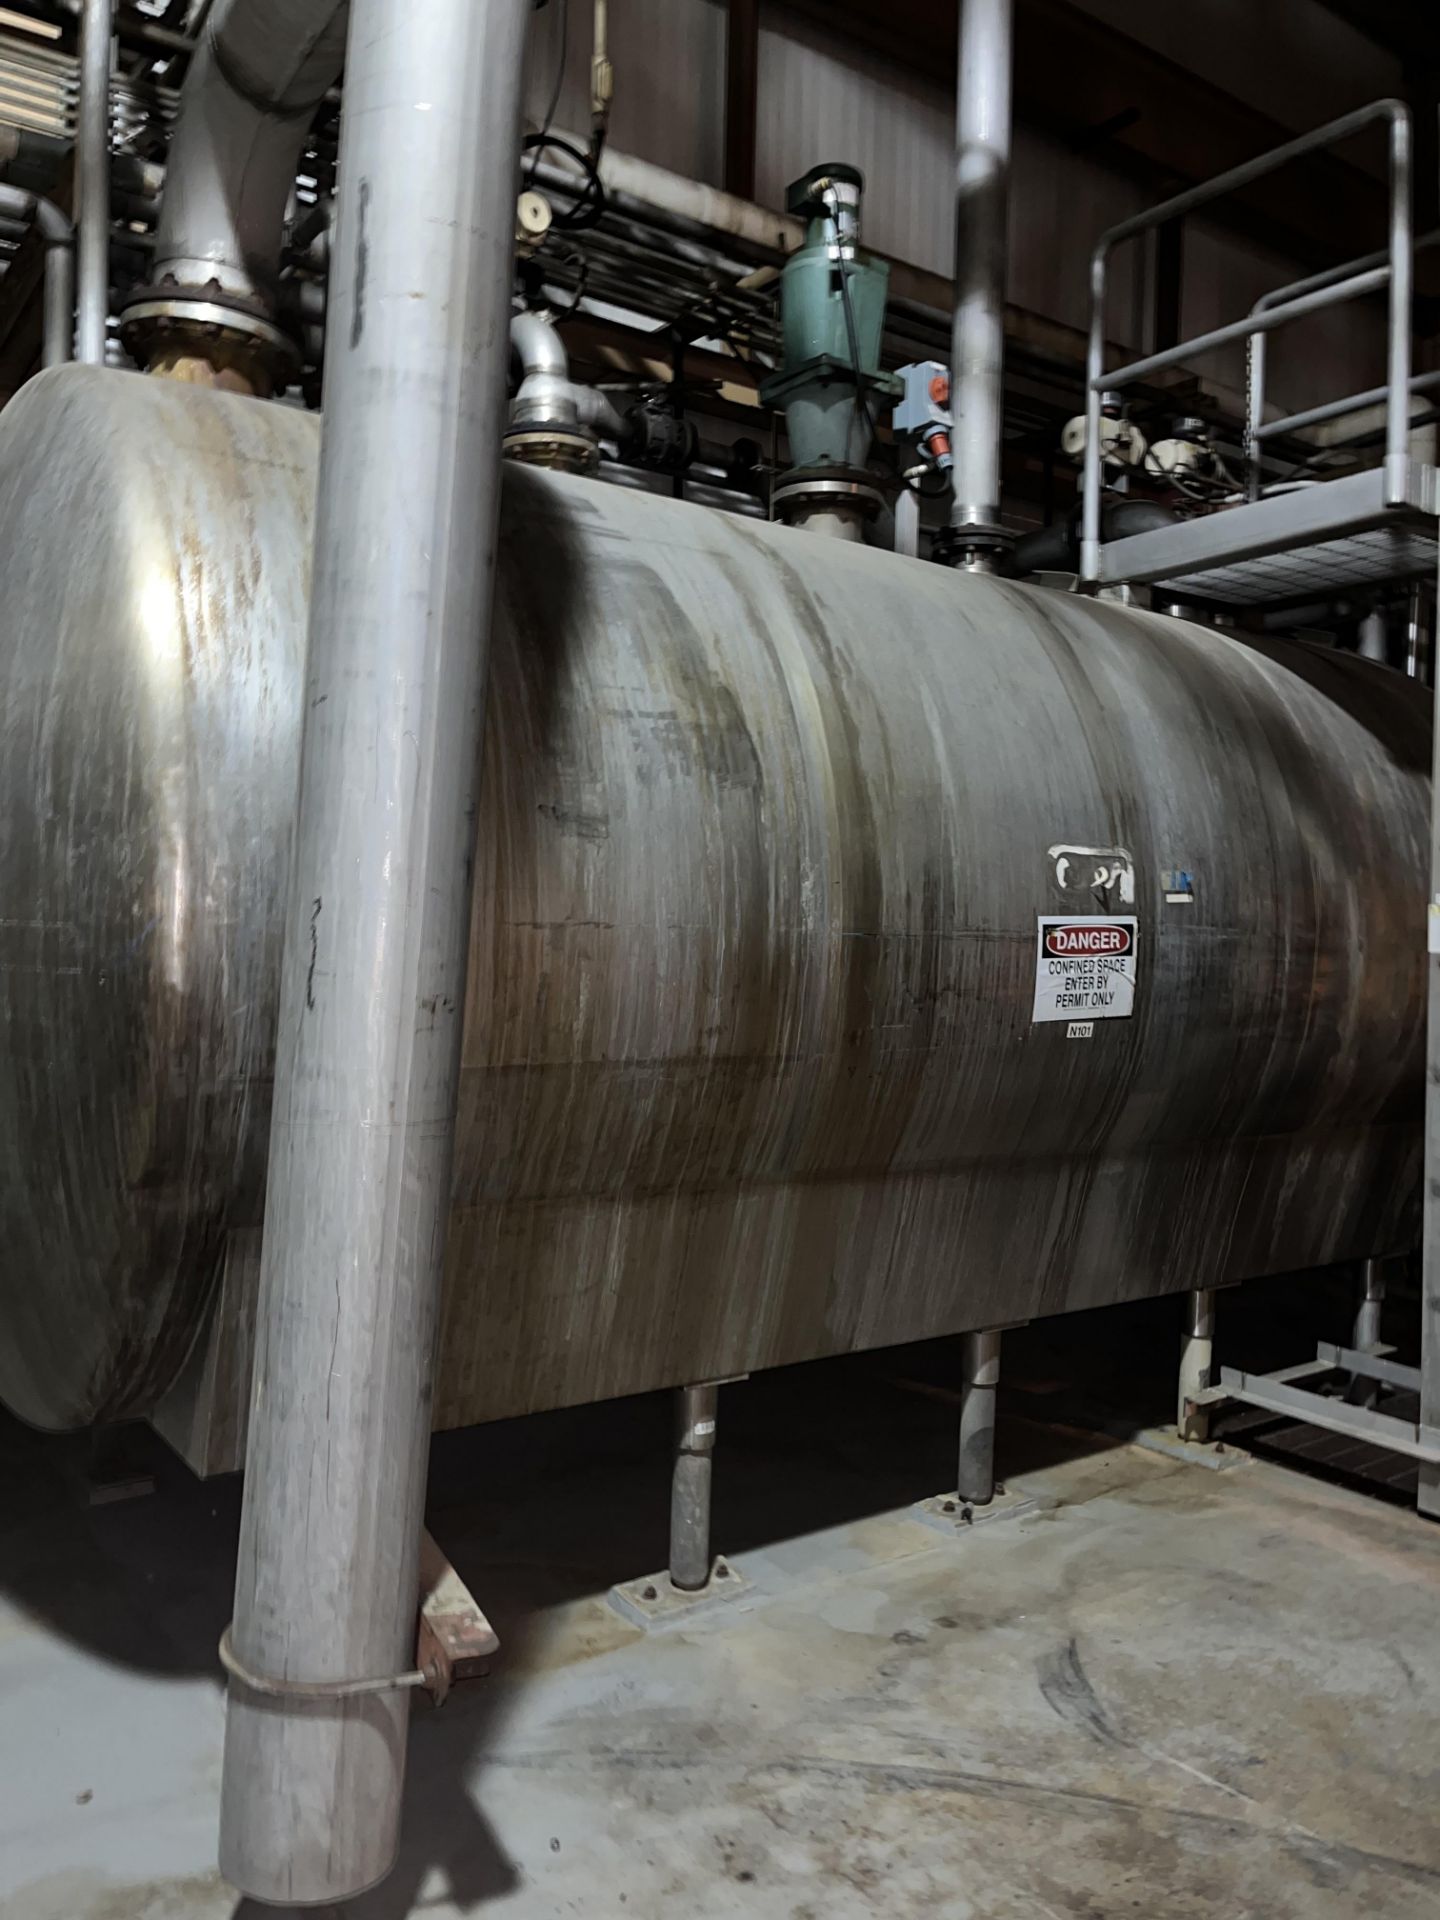 STAINLESS STEEL HORIZONTAL TANK (Located Freehold, NJ) (Simple Loading Fee $1,925)